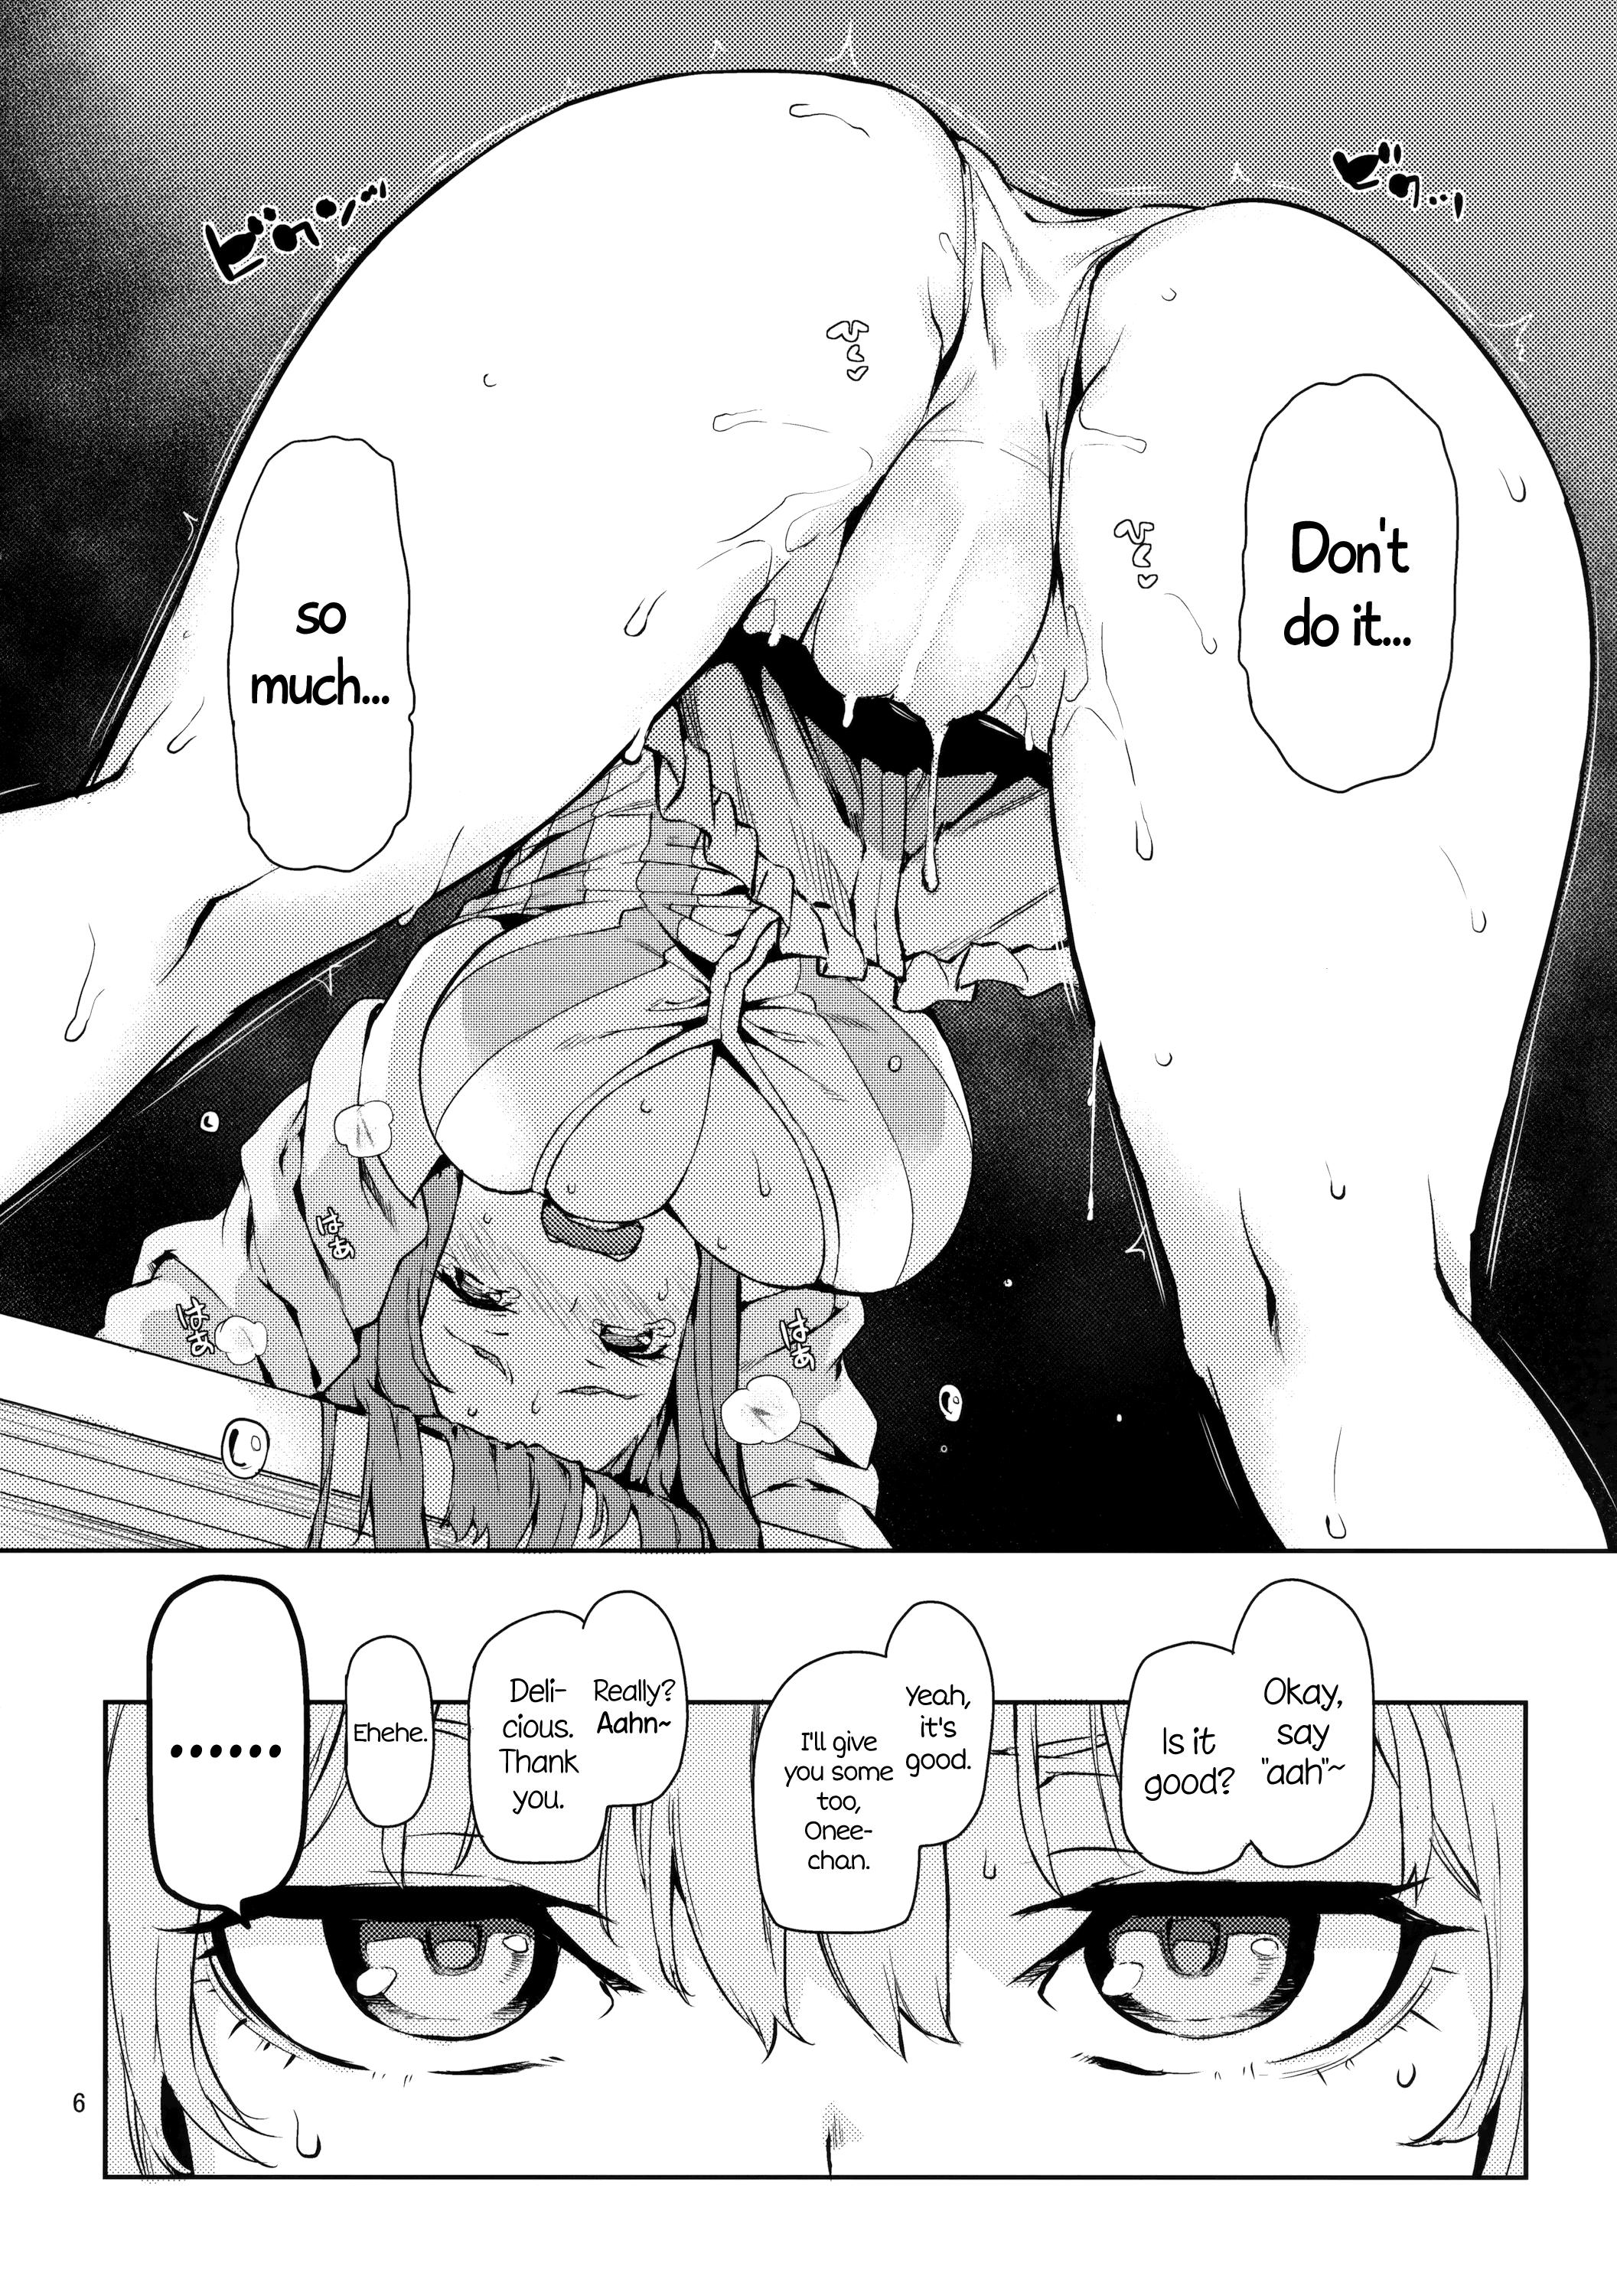 Huge Ass (Reitaisai 13) [Anmitsuyomogitei (Michiking)] Osewa Shinaide Flan Onee-chan! | Don't Take Care Of Me, Flan Onee-chan! (Touhou Project) [English] =Facedesk + CW= - Touhou project Mouth - Page 6